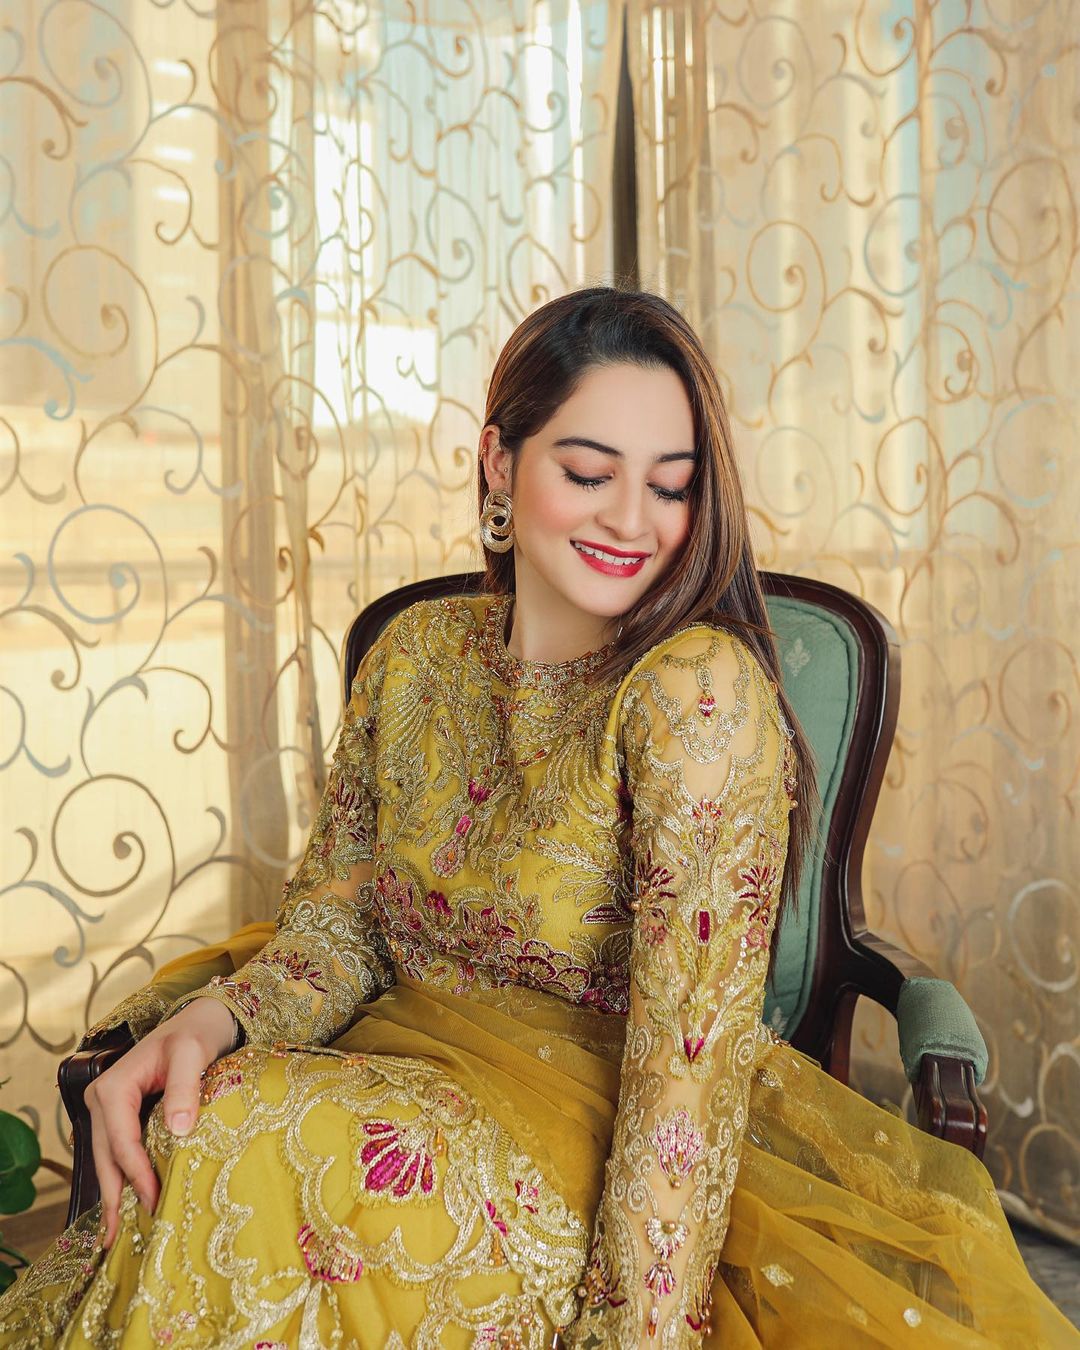 Aiman Khan is Looking Gorgeous in this Yellow Bridal Dress